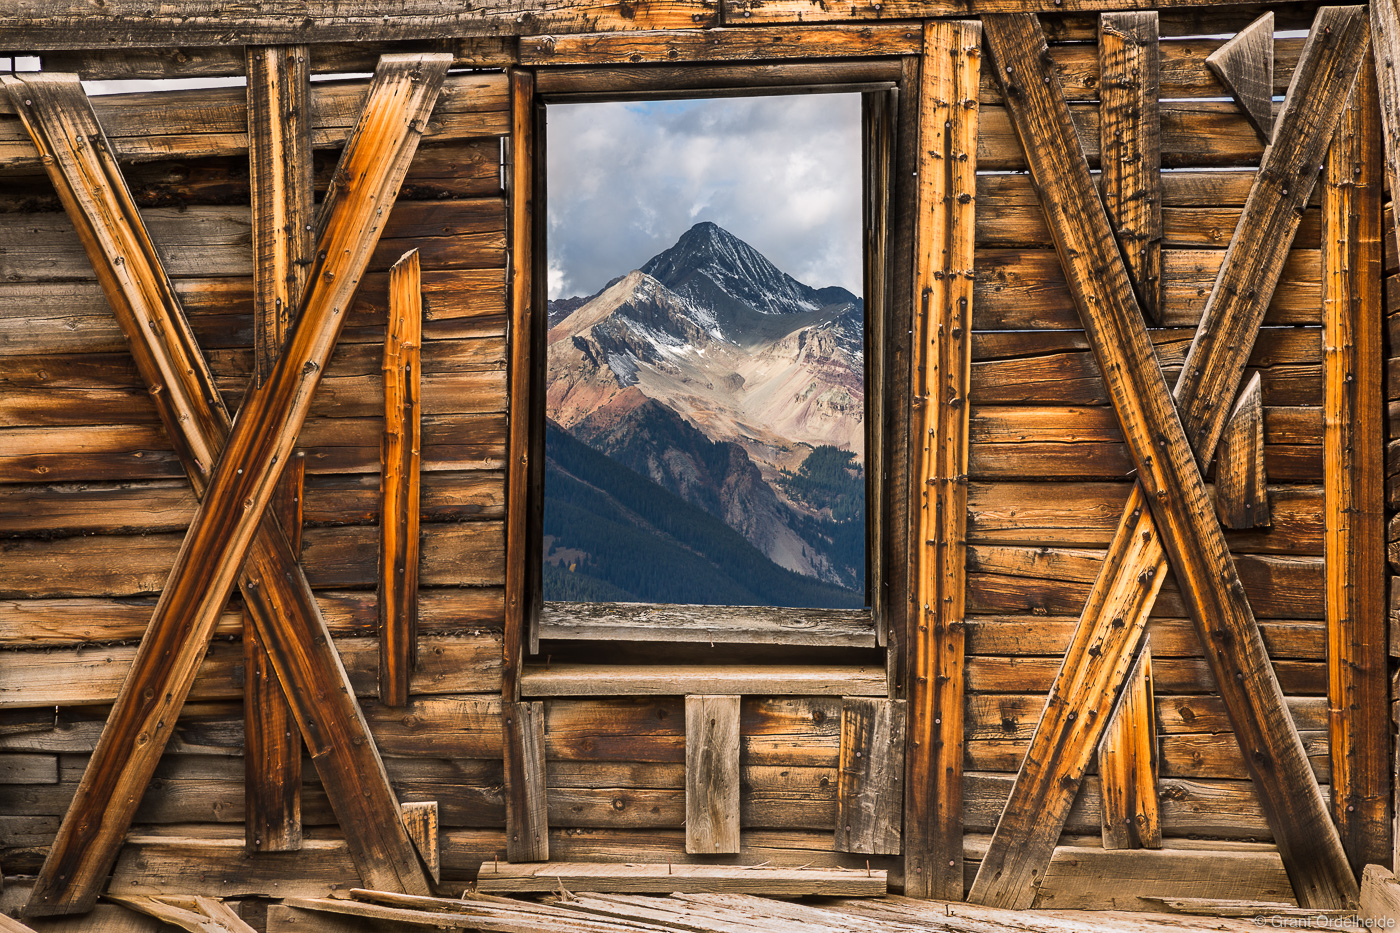 Wilson Peak, a fourteen thousand foot peak, viewed through a window in a dilapidated building at Alta Lakes ghost town above...